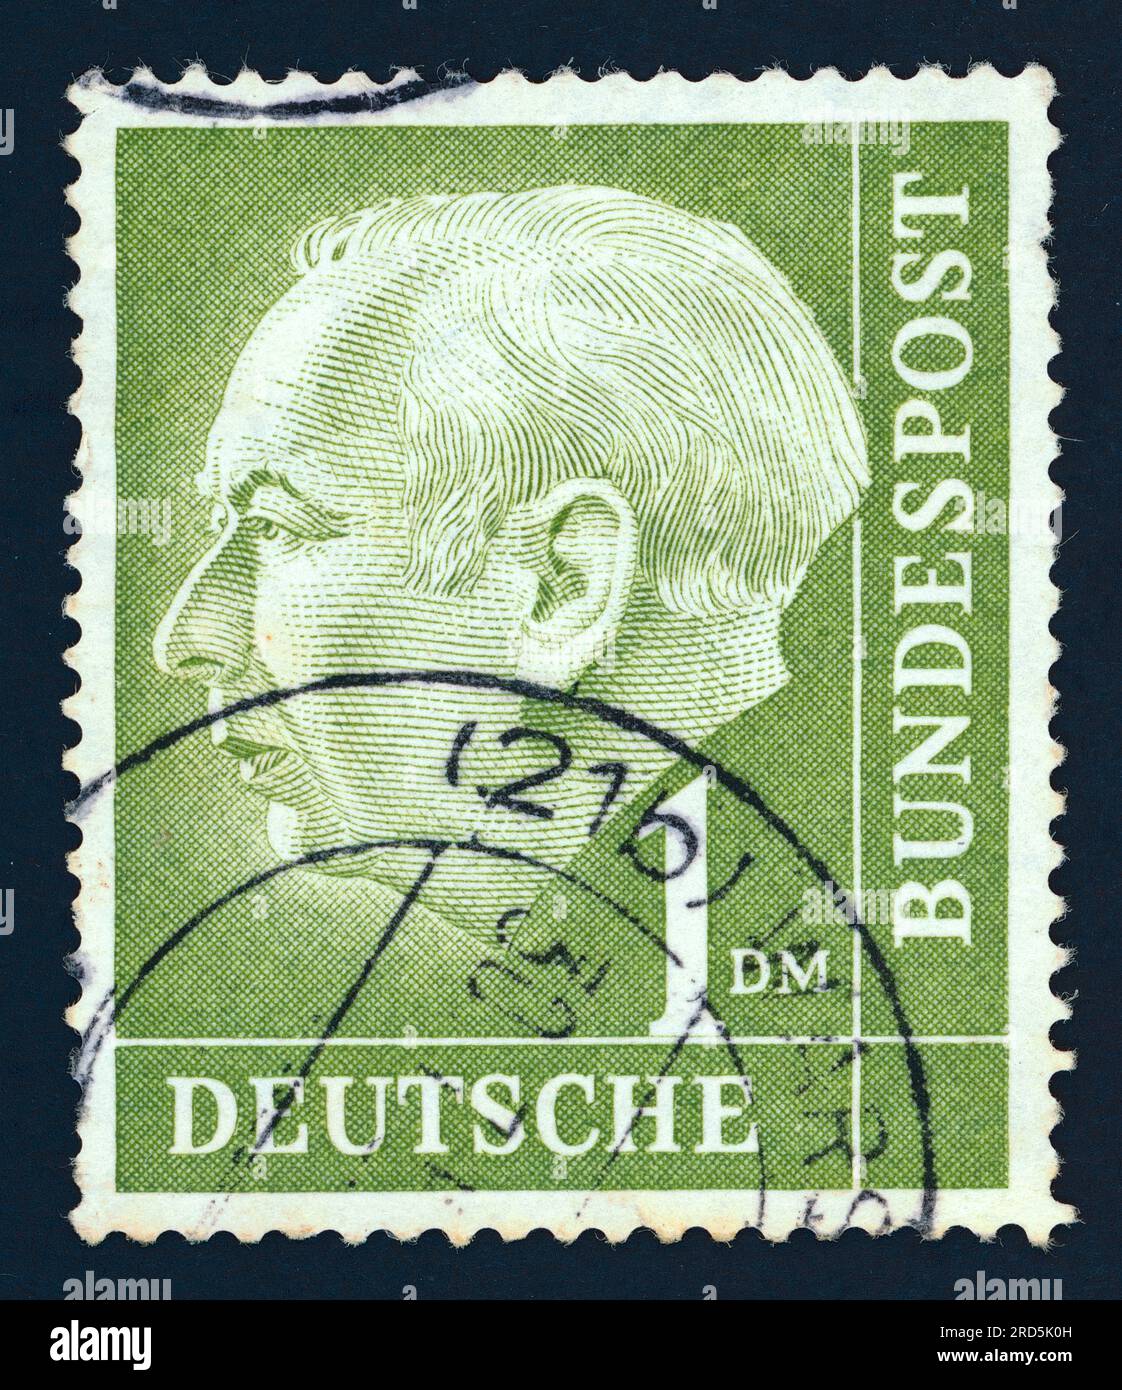 Theodor Heuss, the first president of West Germany from 1949 to 1959. Postage stamp issued in Federal Republic of Germany (West Germany) in 1954. Stock Photo